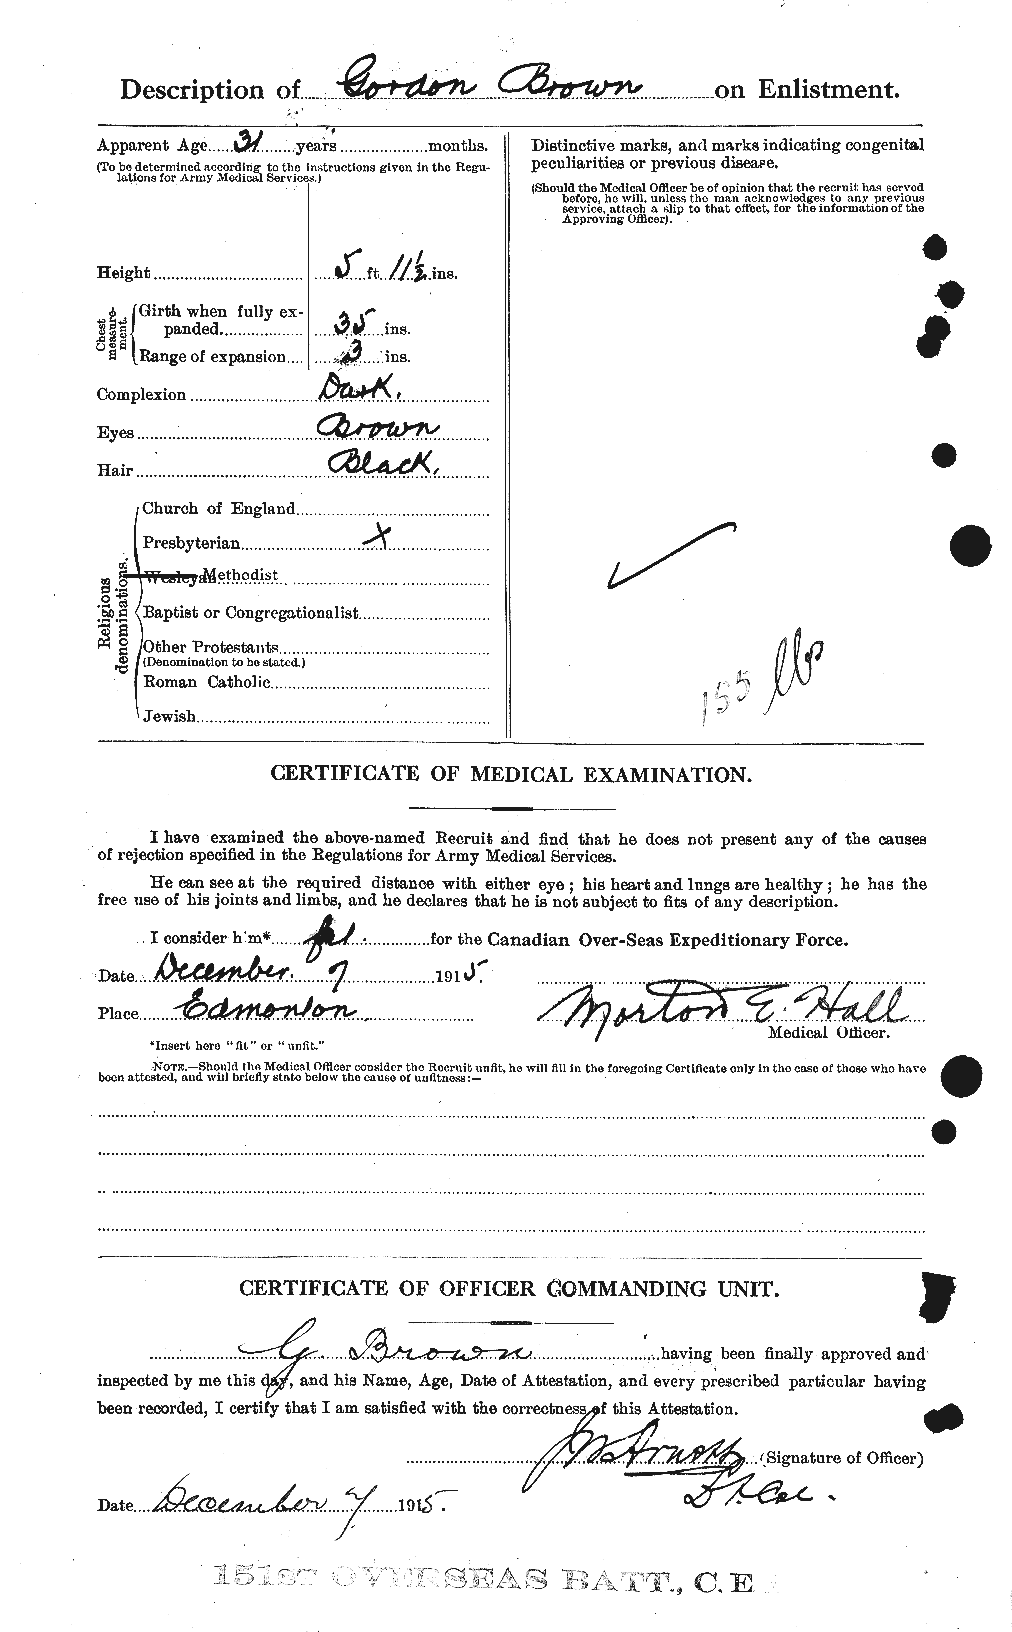 Personnel Records of the First World War - CEF 262623b